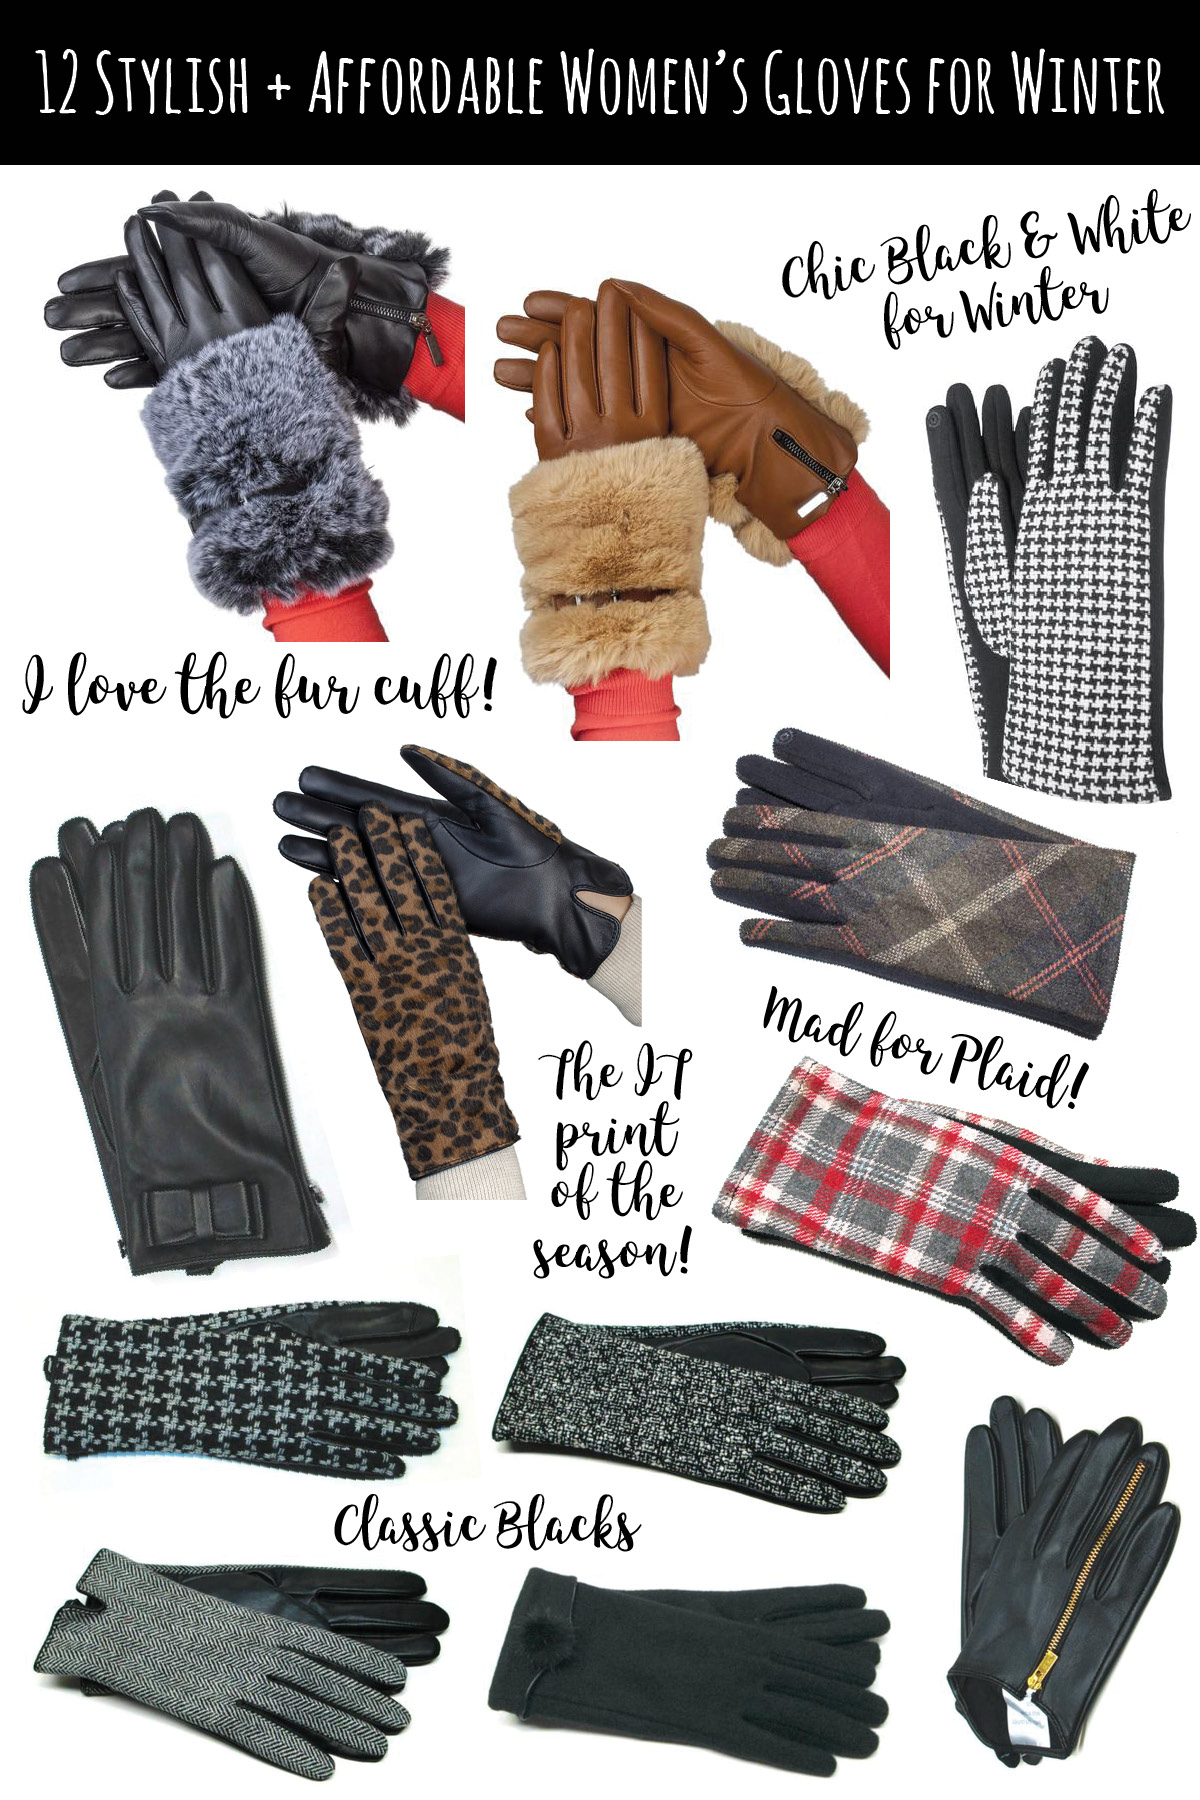 12 Must Have Stylish yet Affordable Women’s Gloves for Winter | Gloves International. Gloves make the best gifts and stocking stuffers for those picky friends and family. | Women's Gift Guide | Stylish Gloves | Women's Gloves | Women's Leather Gloves | Affordable Gloves | Gloves under $50 | Designer Gloves for Women | Faux Fur Gloves | Touch Screen Gloves | Stylish Winter Gloves for Women featured by top Austin fashion blog Dressed to Kill